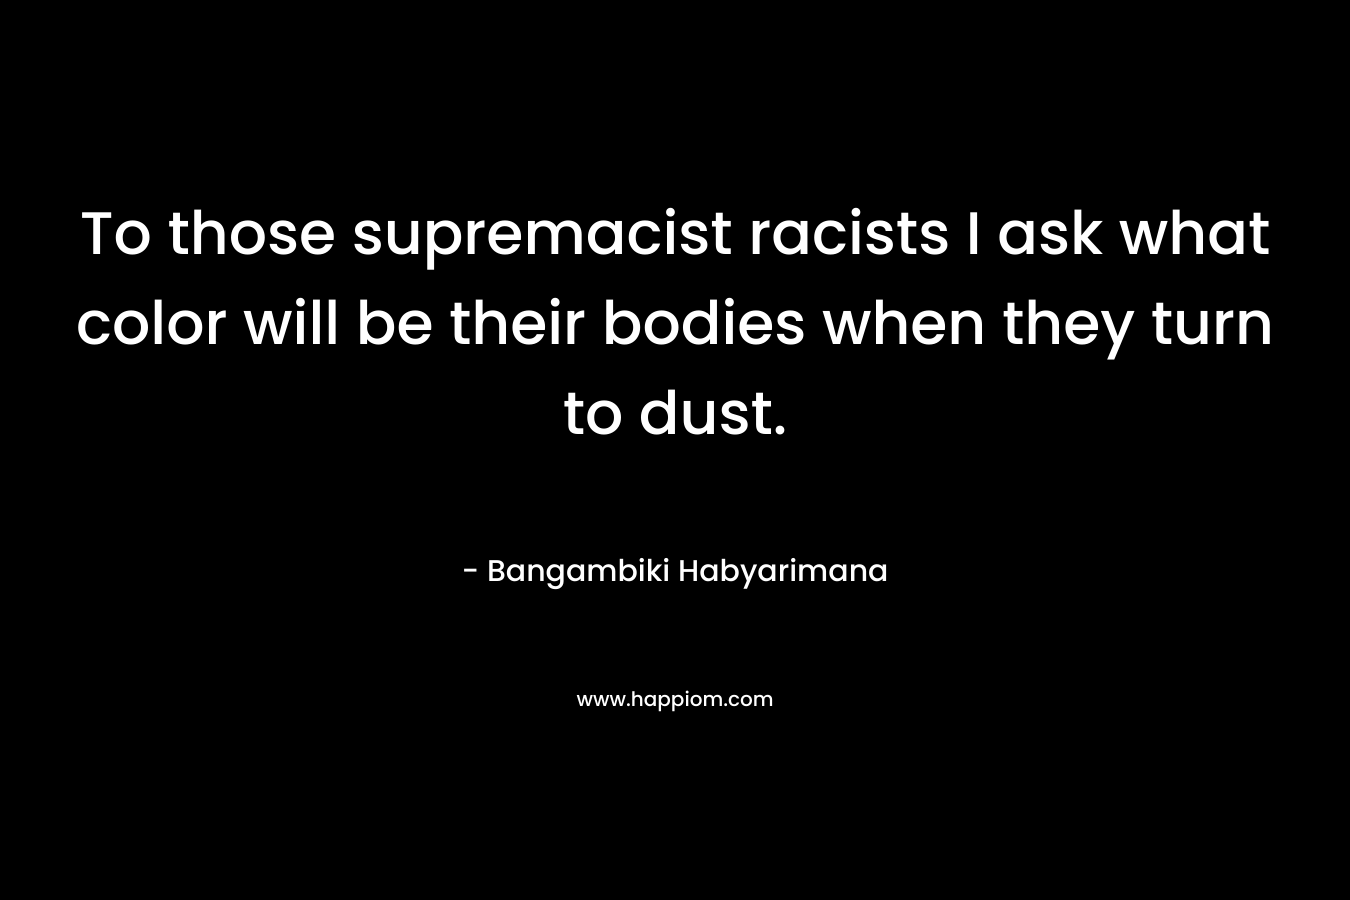 To those supremacist racists I ask what color will be their bodies when they turn to dust. – Bangambiki Habyarimana